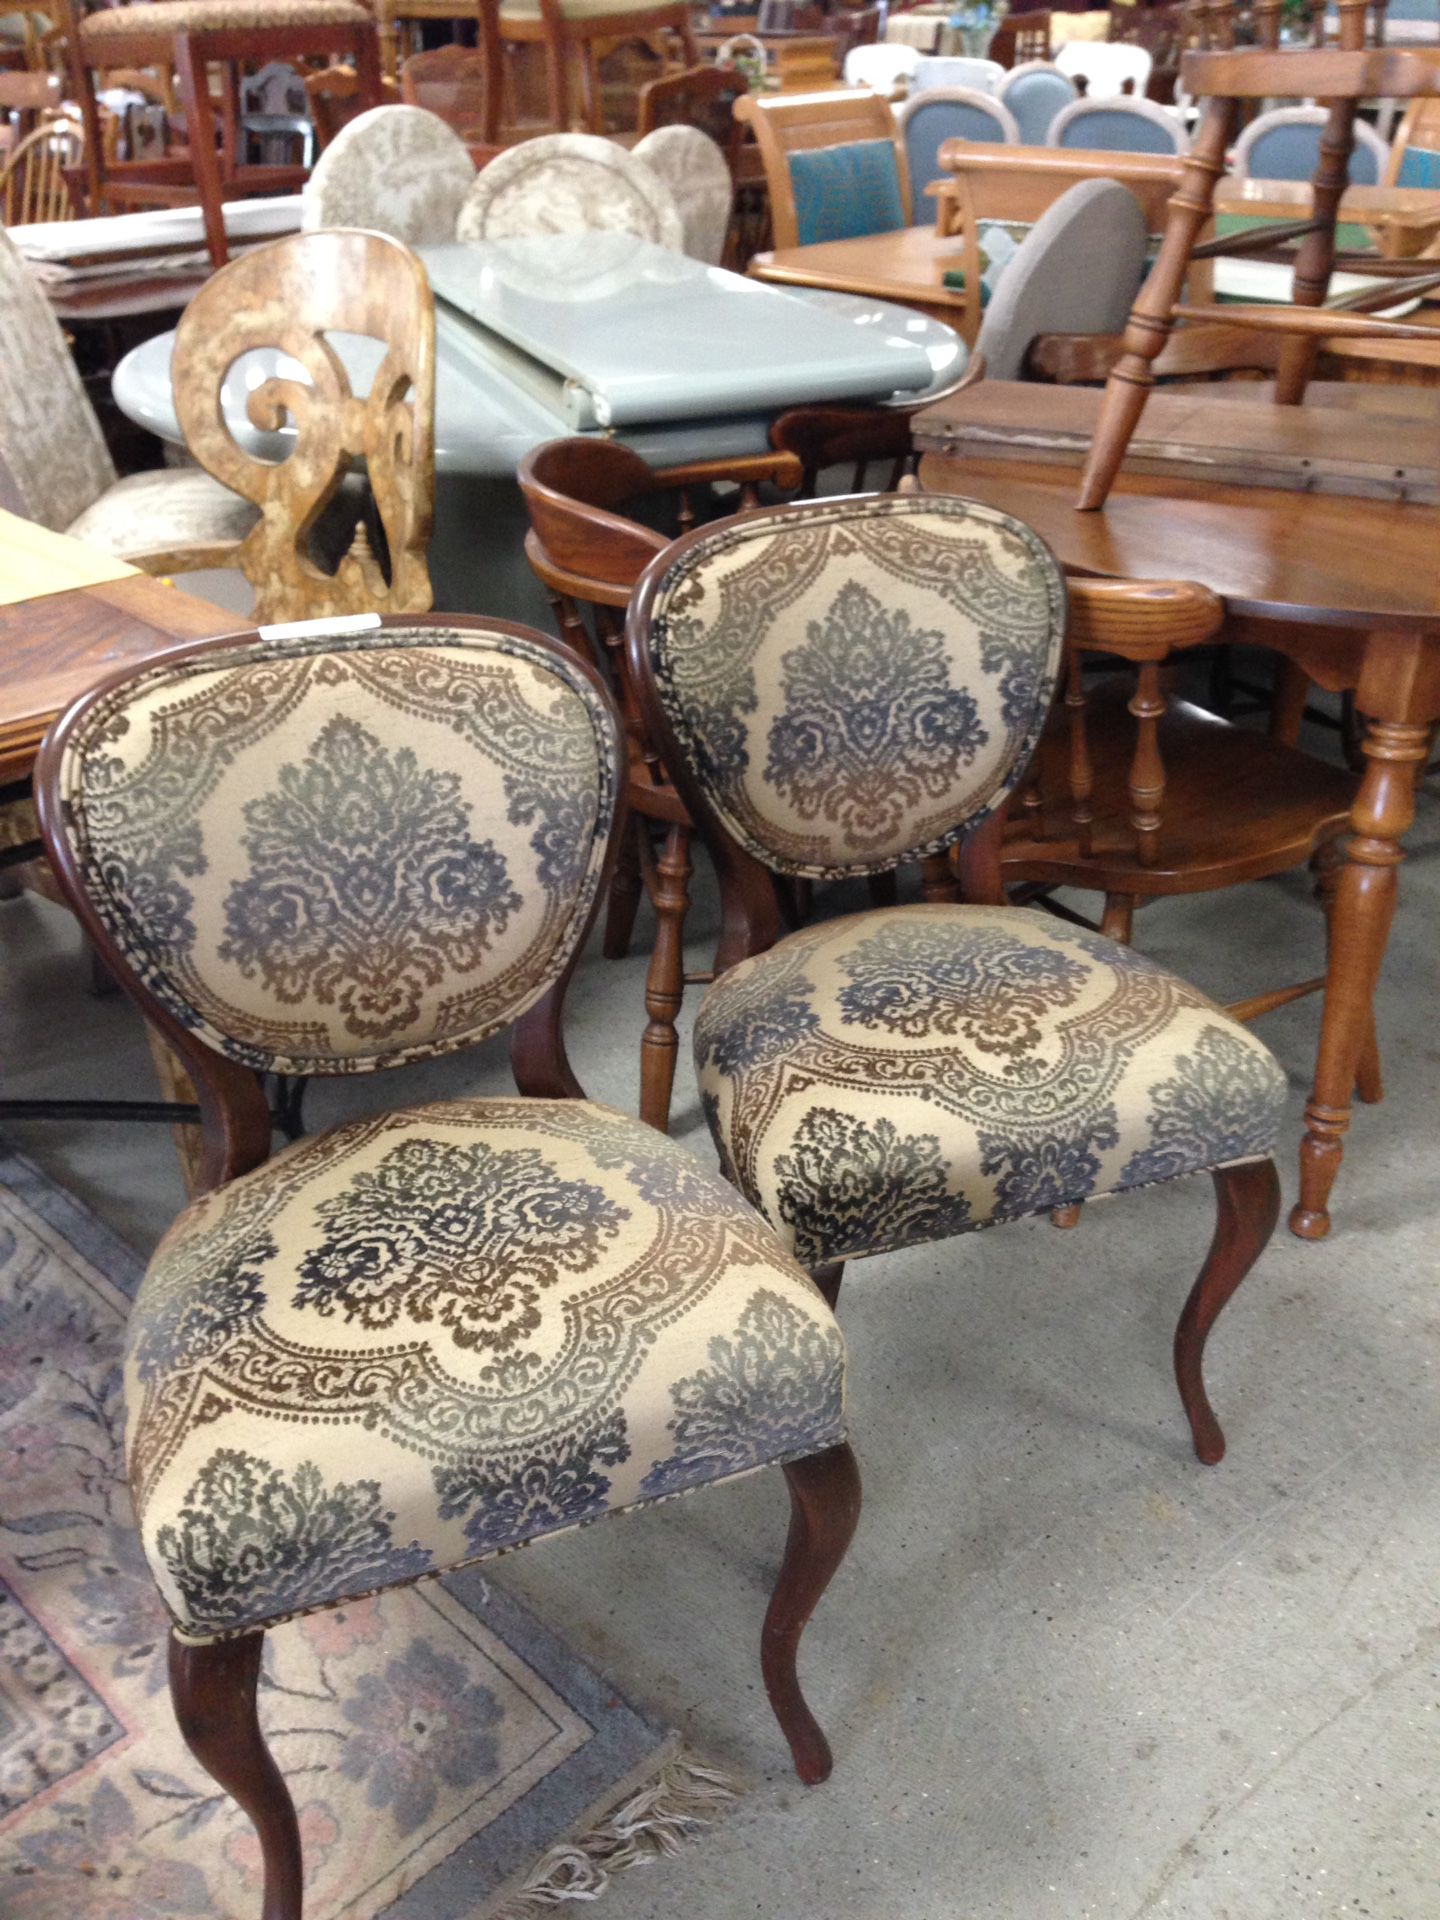 Vintage chairs for only $140.00